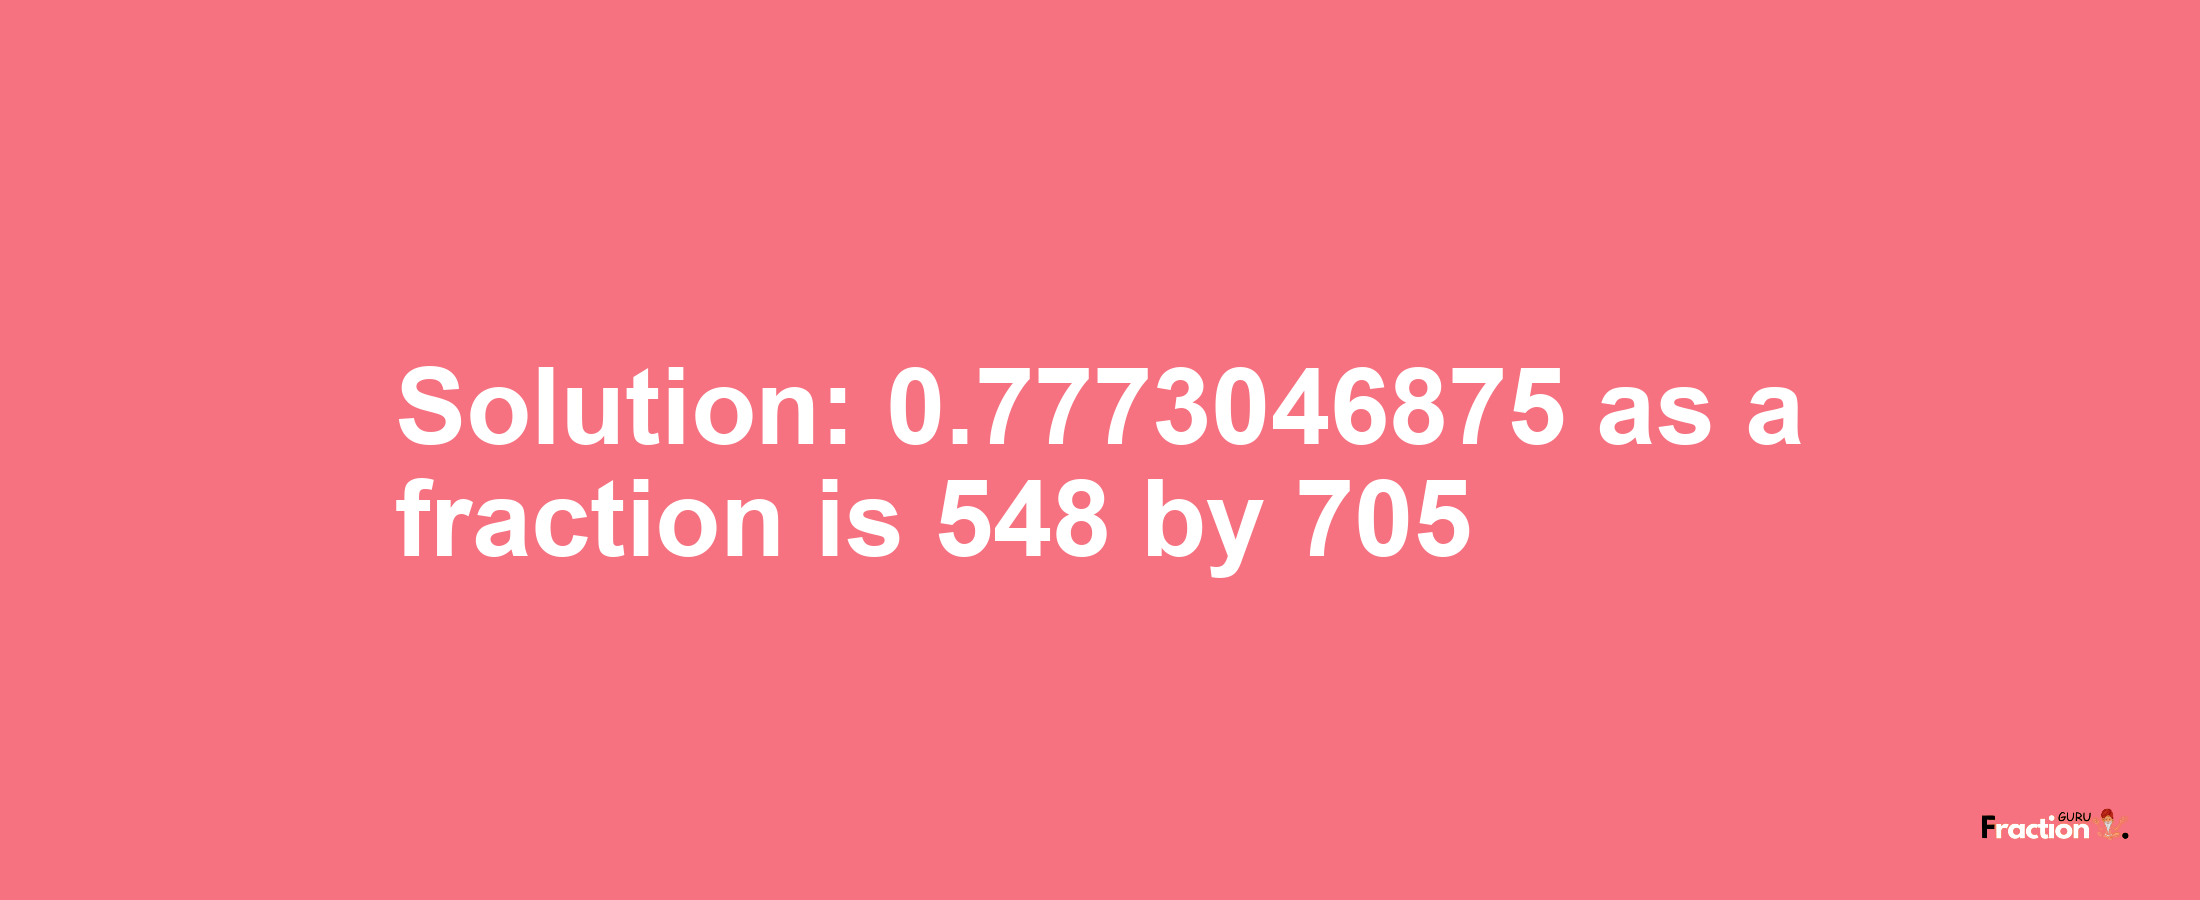 Solution:0.7773046875 as a fraction is 548/705